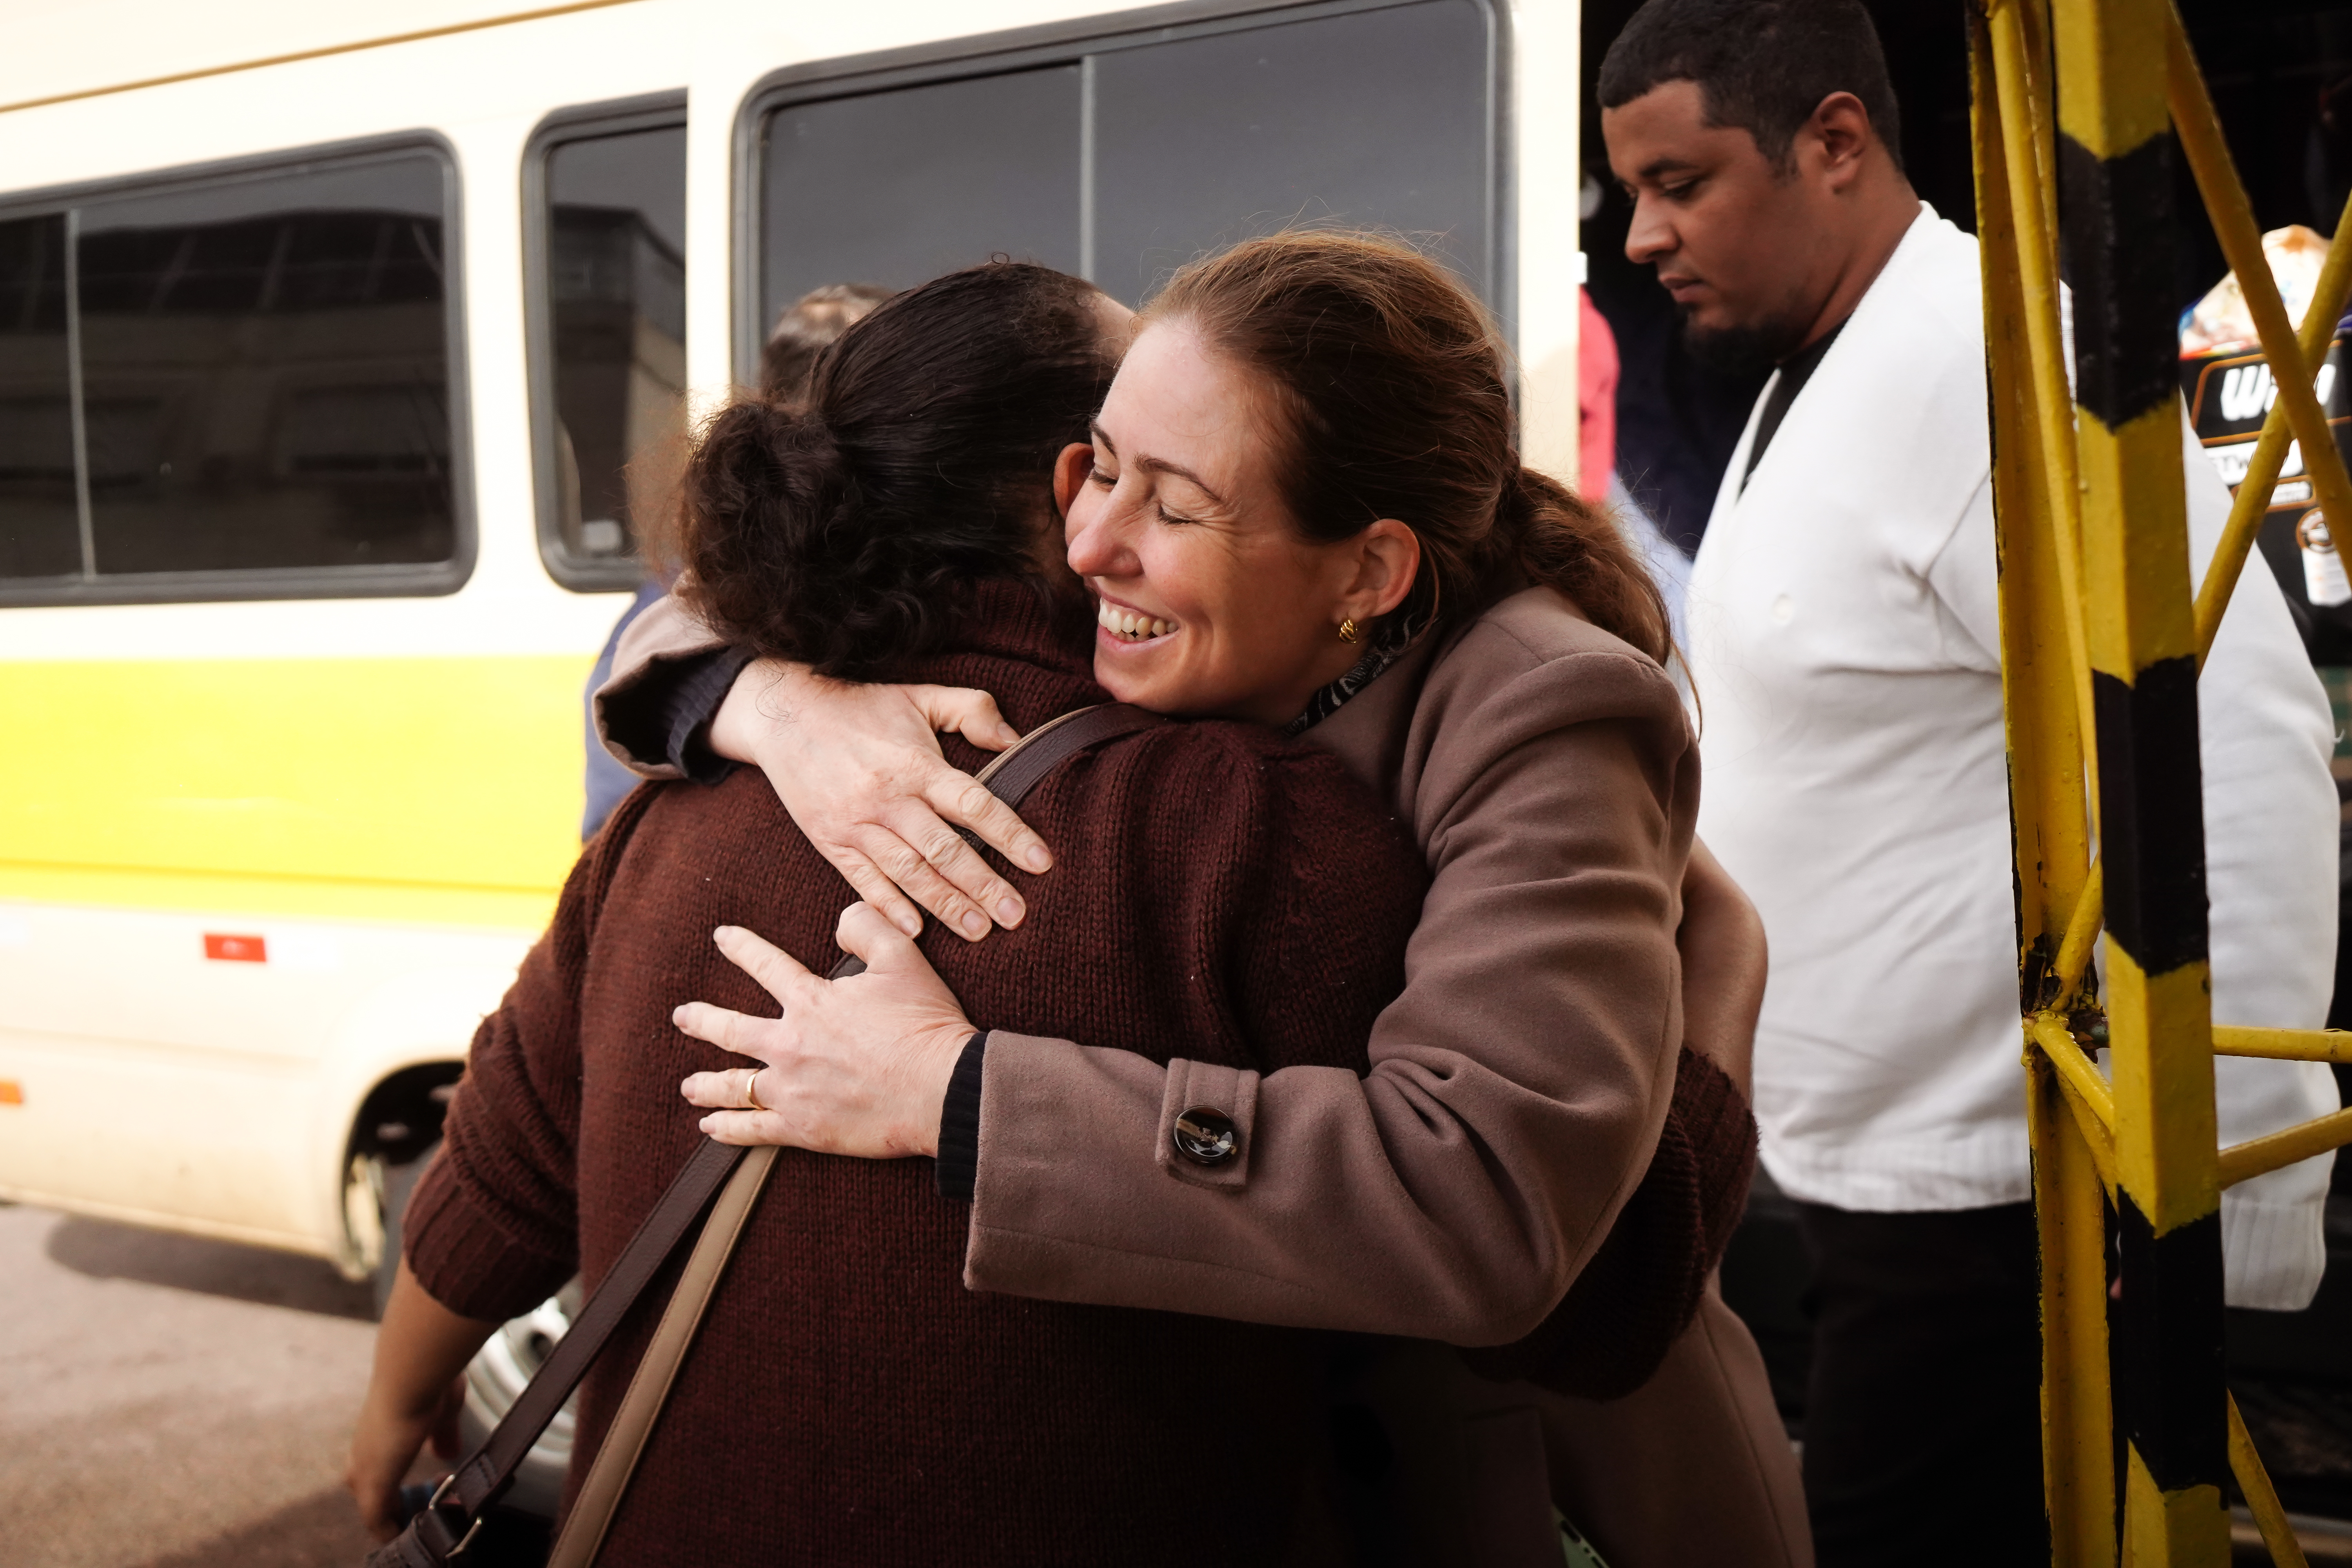 A brown-haired woman smiles as she embraces a woman in a brown sweater in front of a bus from which more people emerge